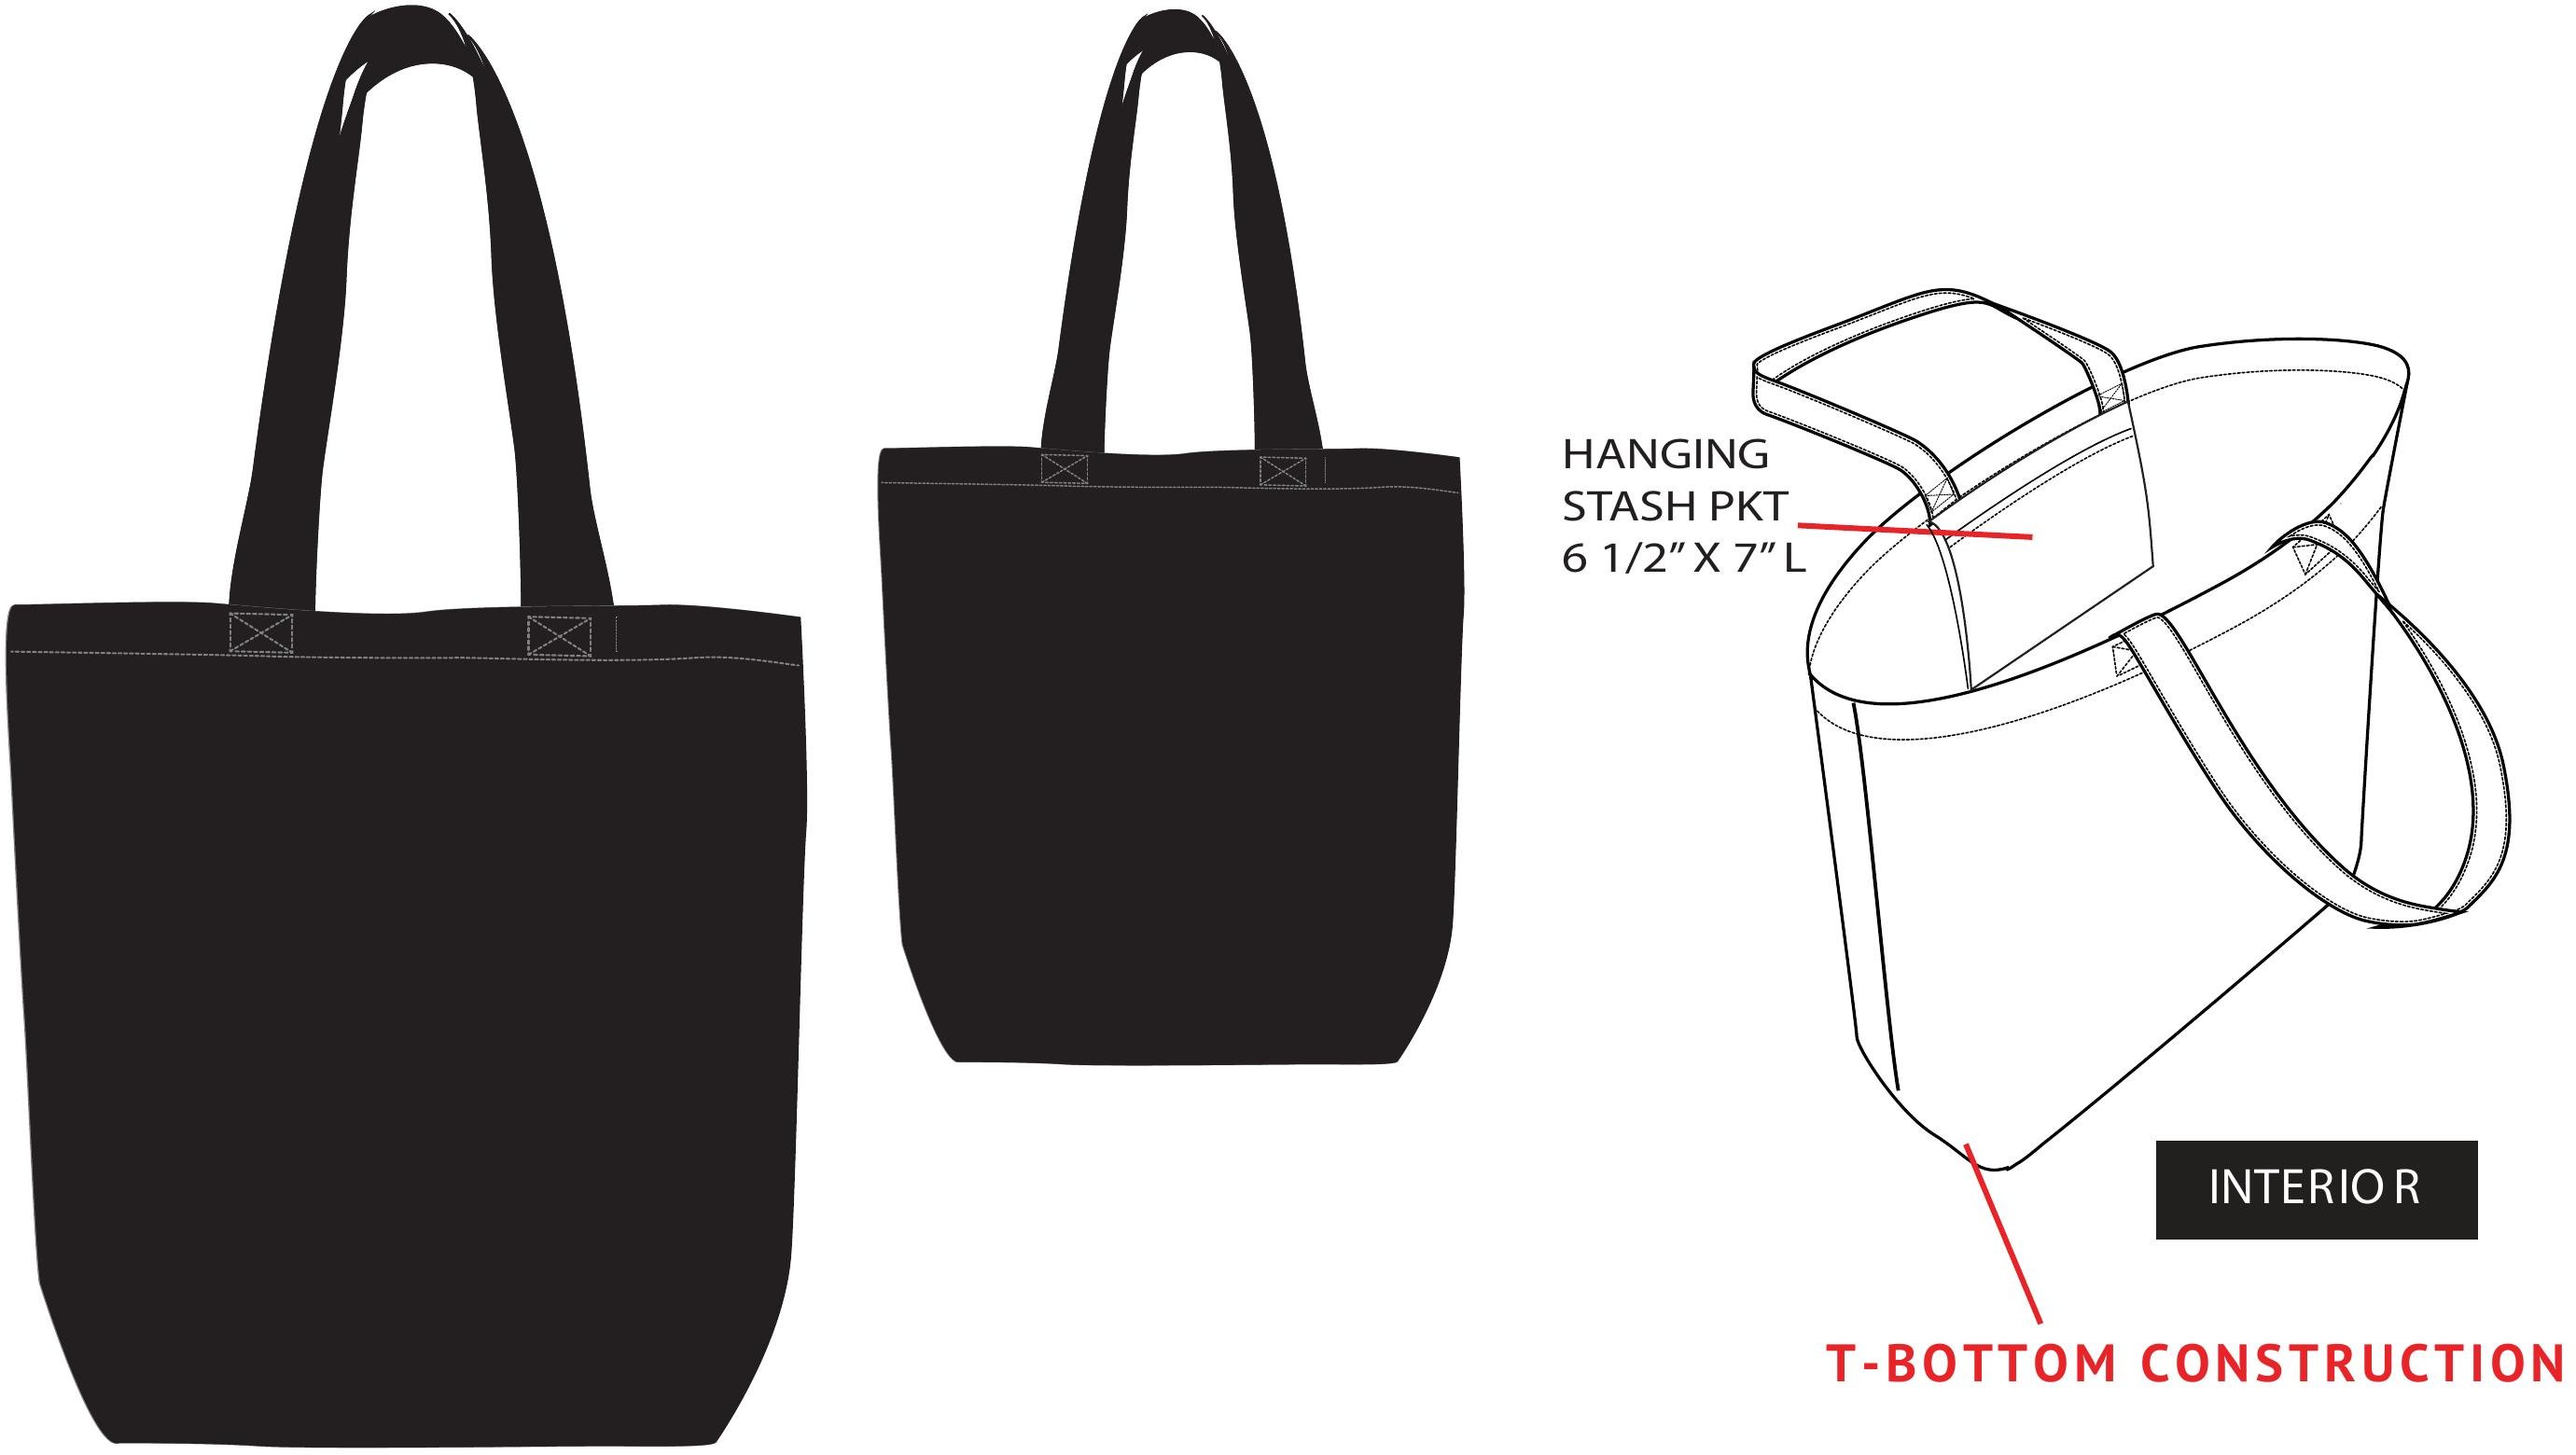 Generic black, white and natural tote bag-no screen print , only blank in 12oz cotton canvas with interior hanging pkt